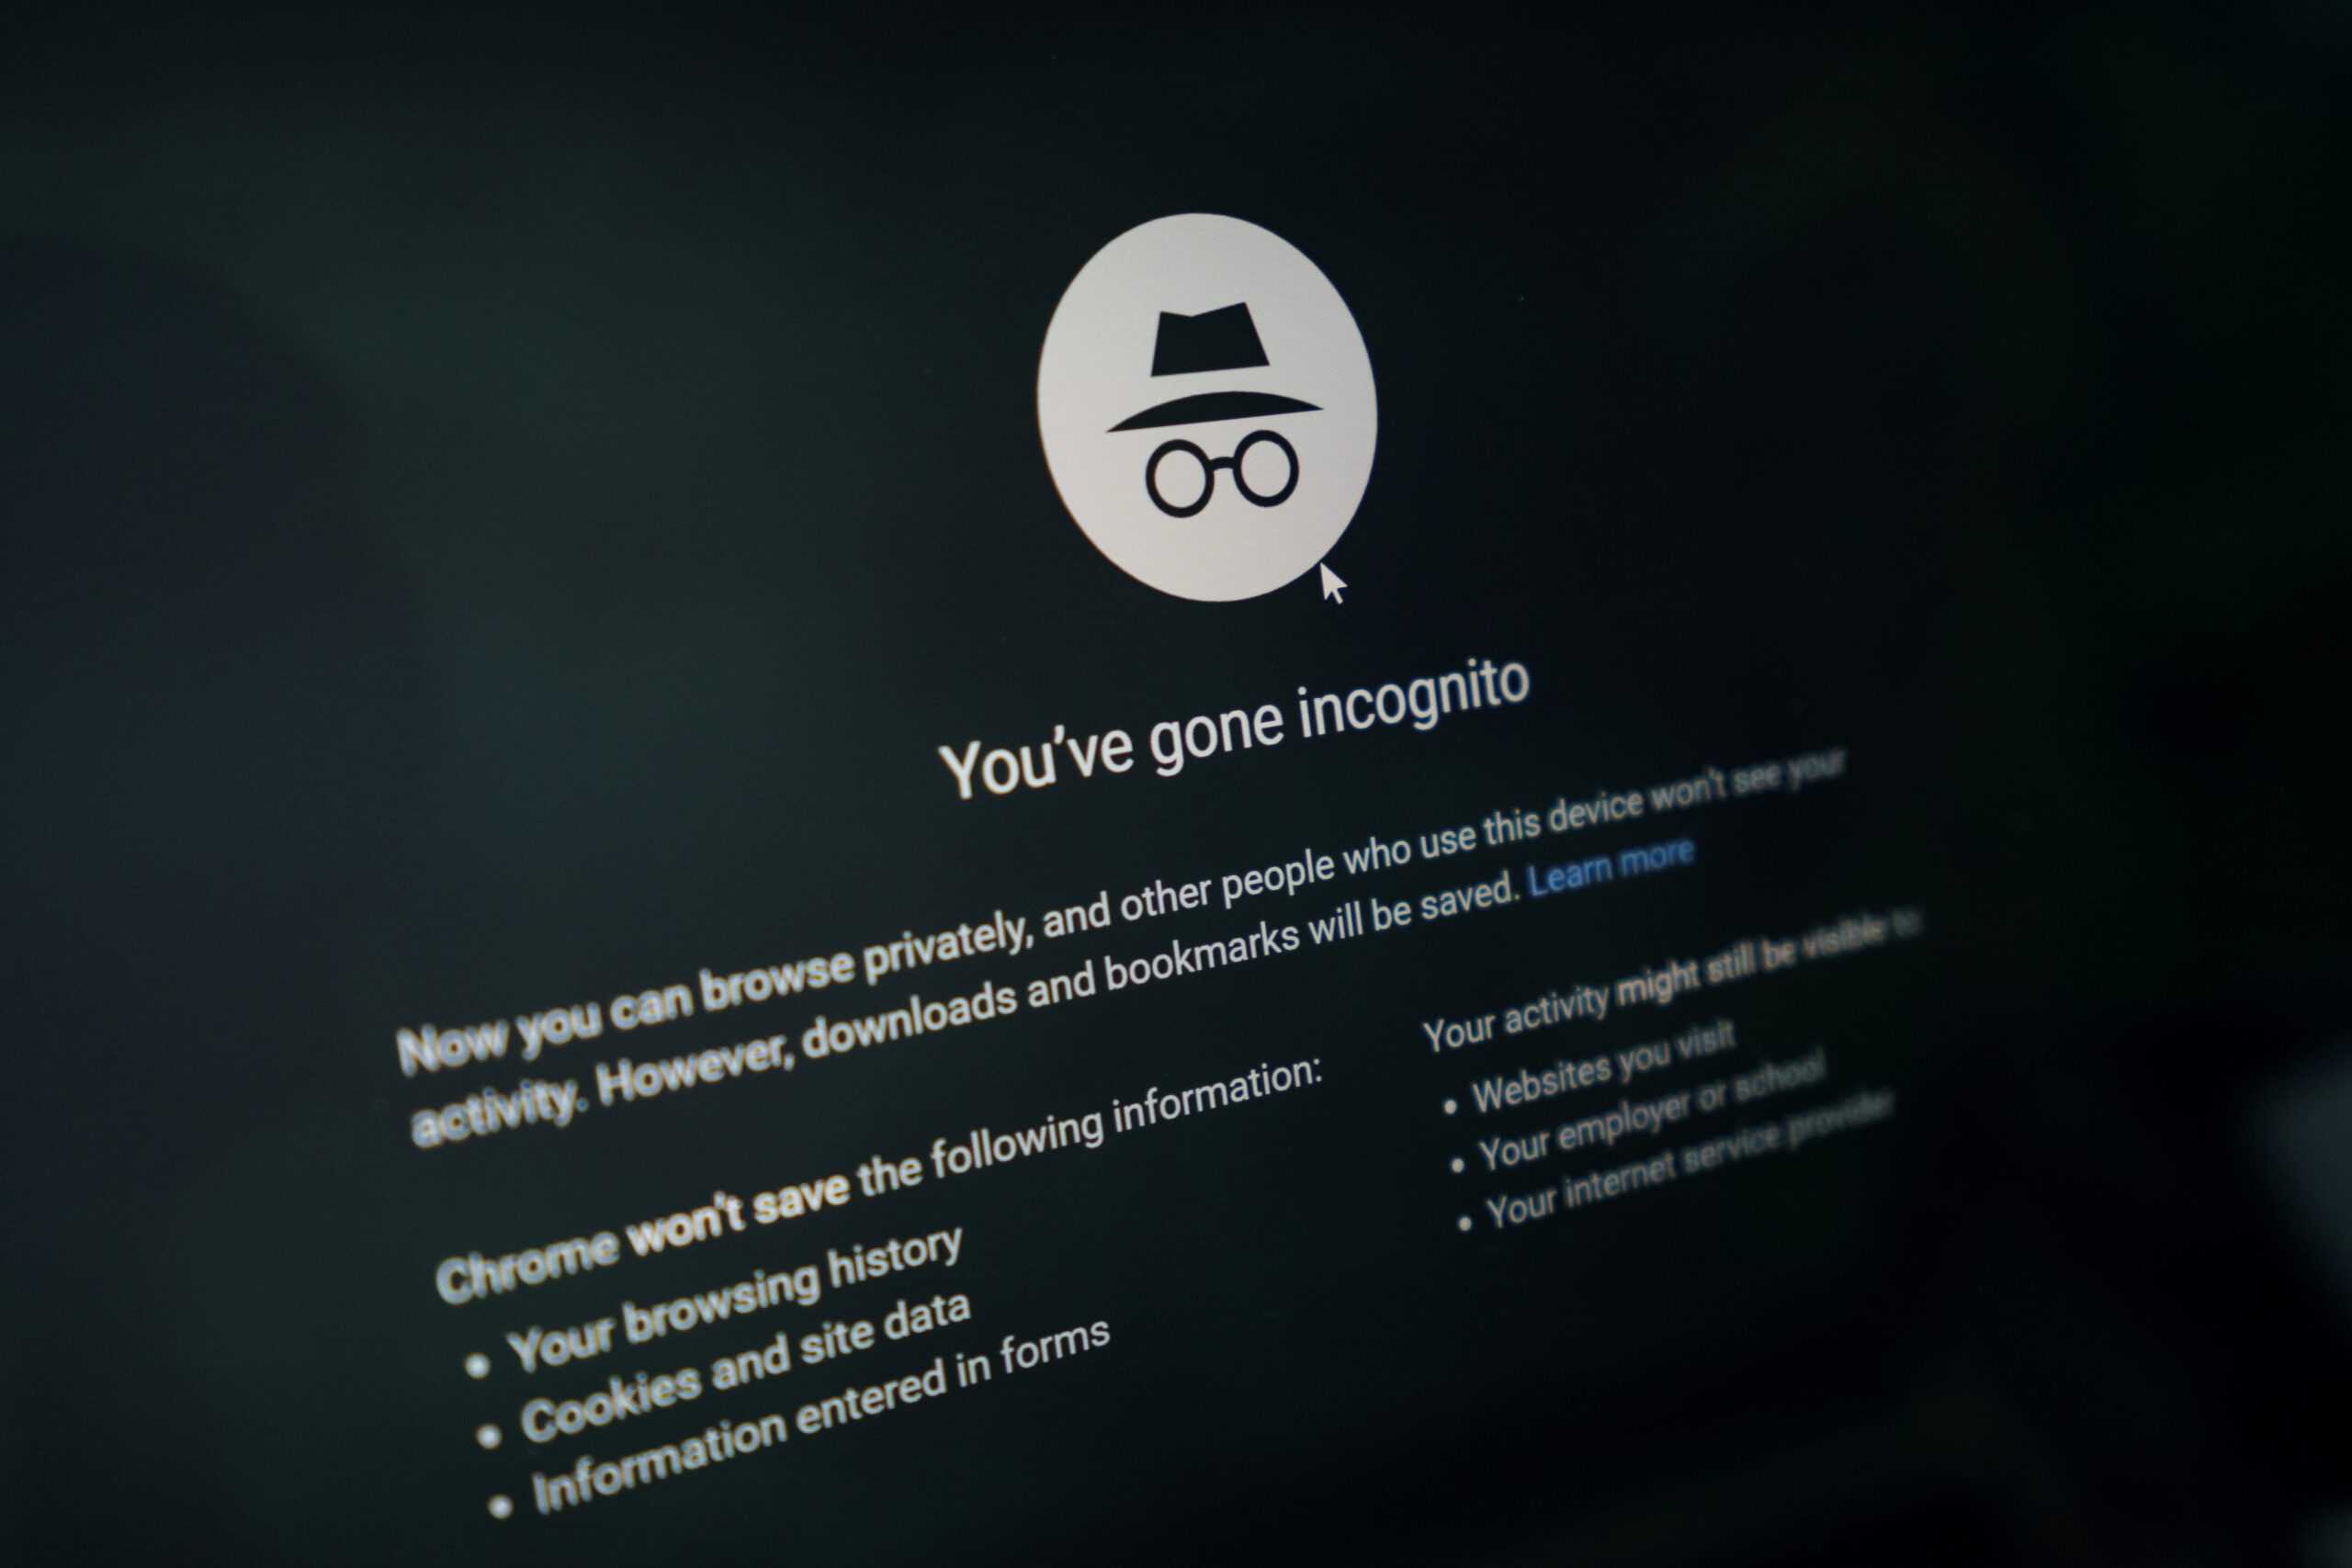 How To Use Incognito Mode On Chrome